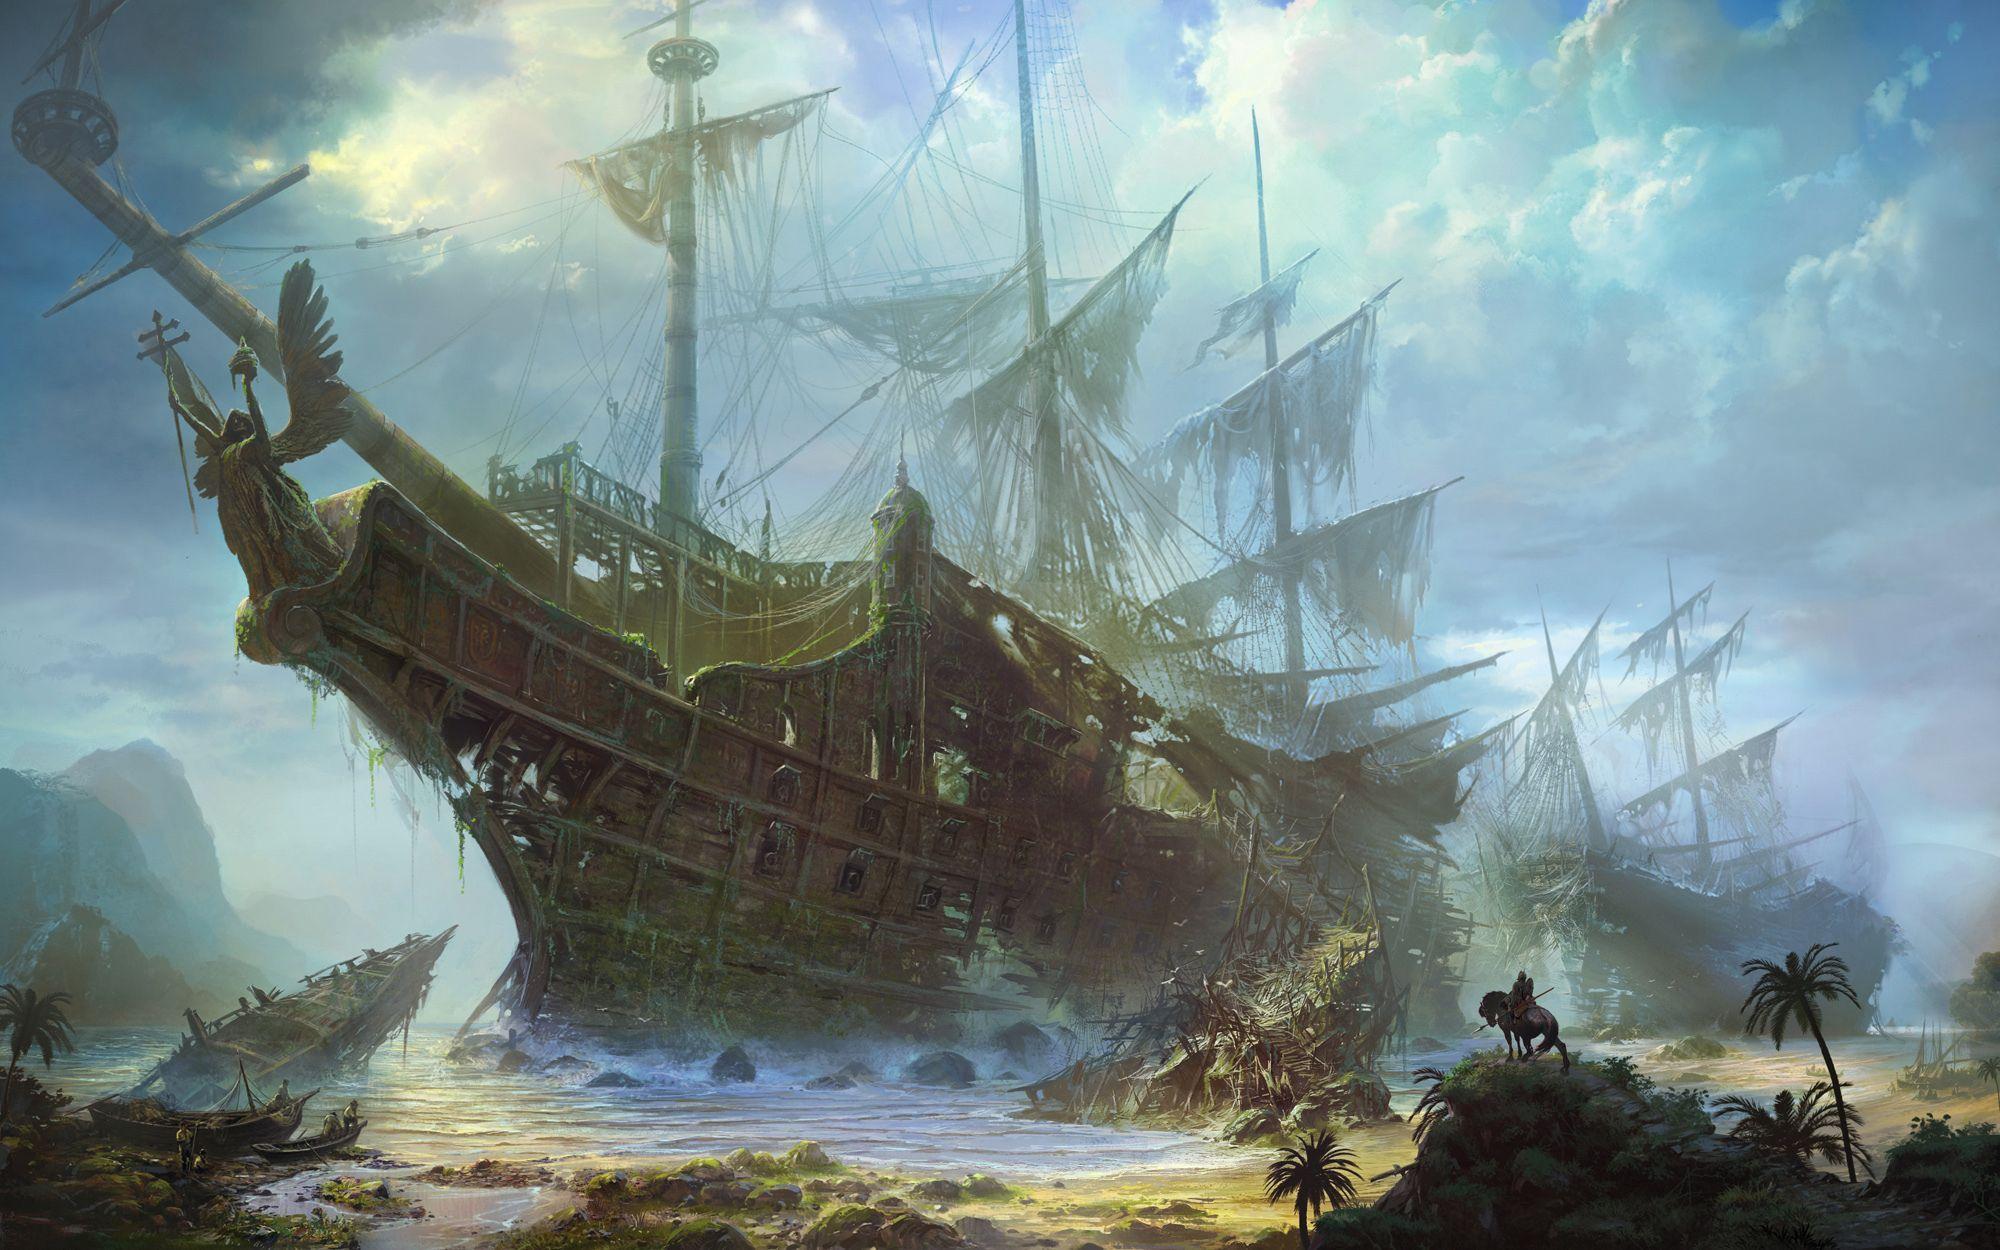 Shipwreck HD Wallpaper and Background Image